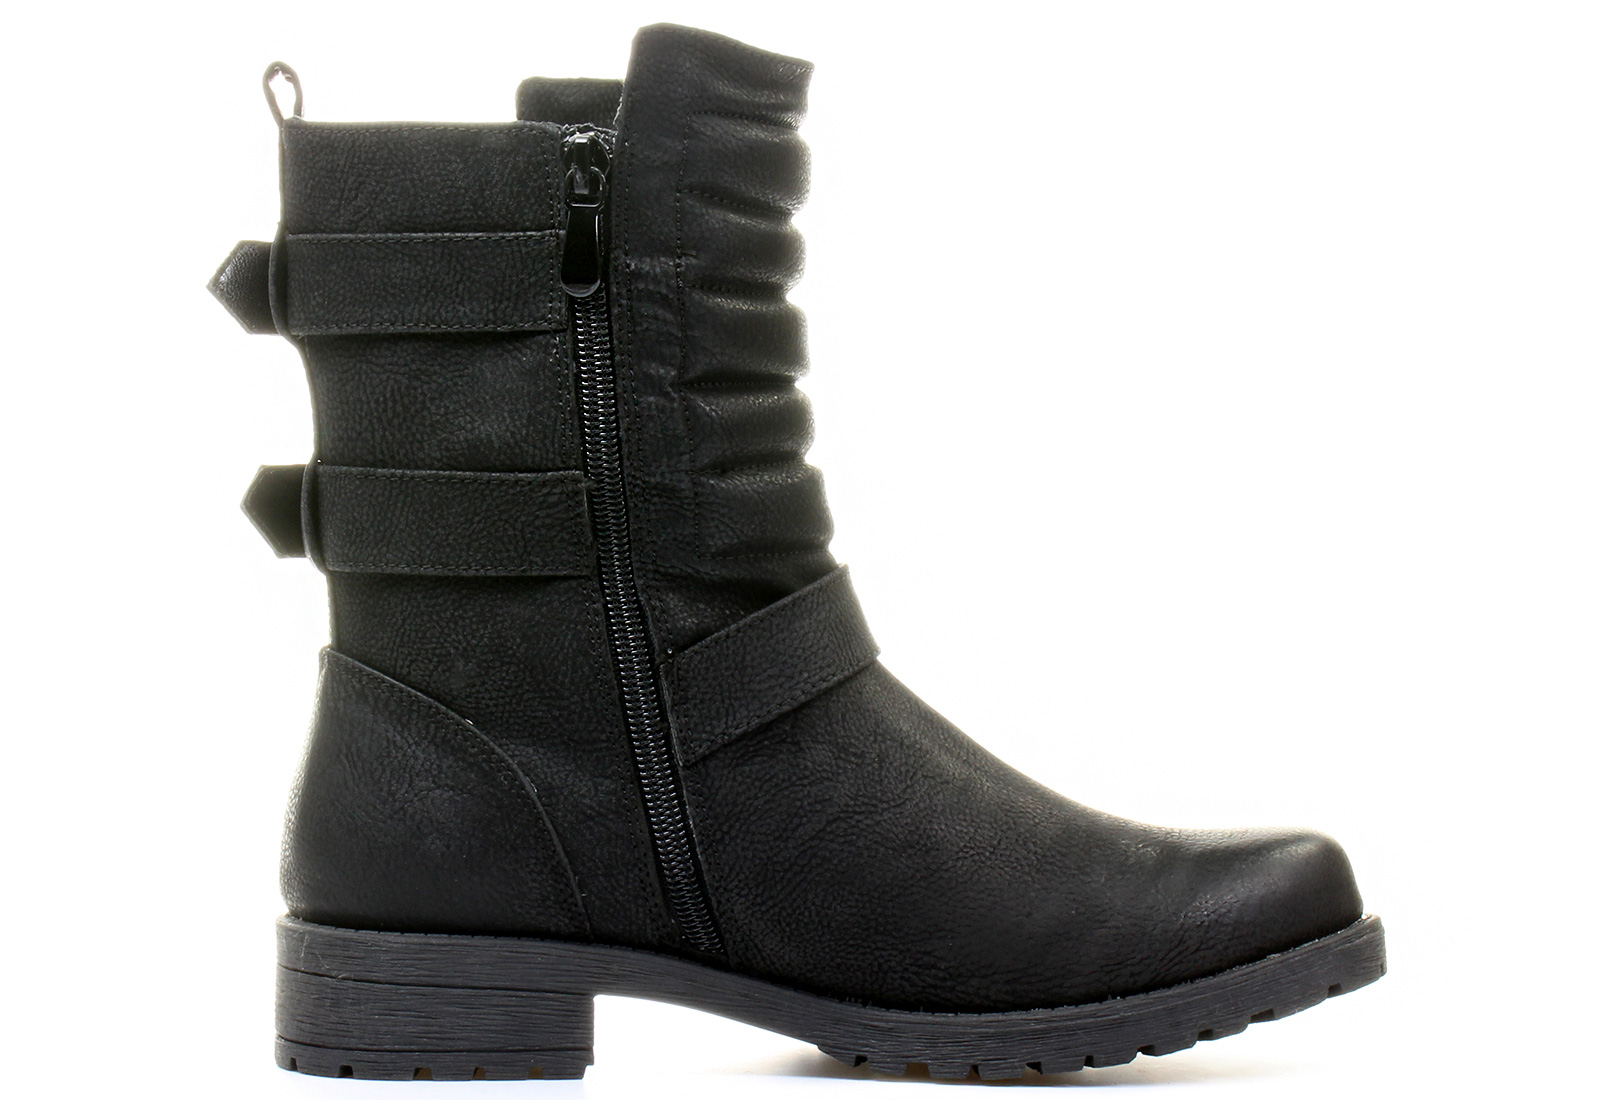 Blink Boots - Maron Cleated - 400657-d-01 - Online shop for sneakers ...